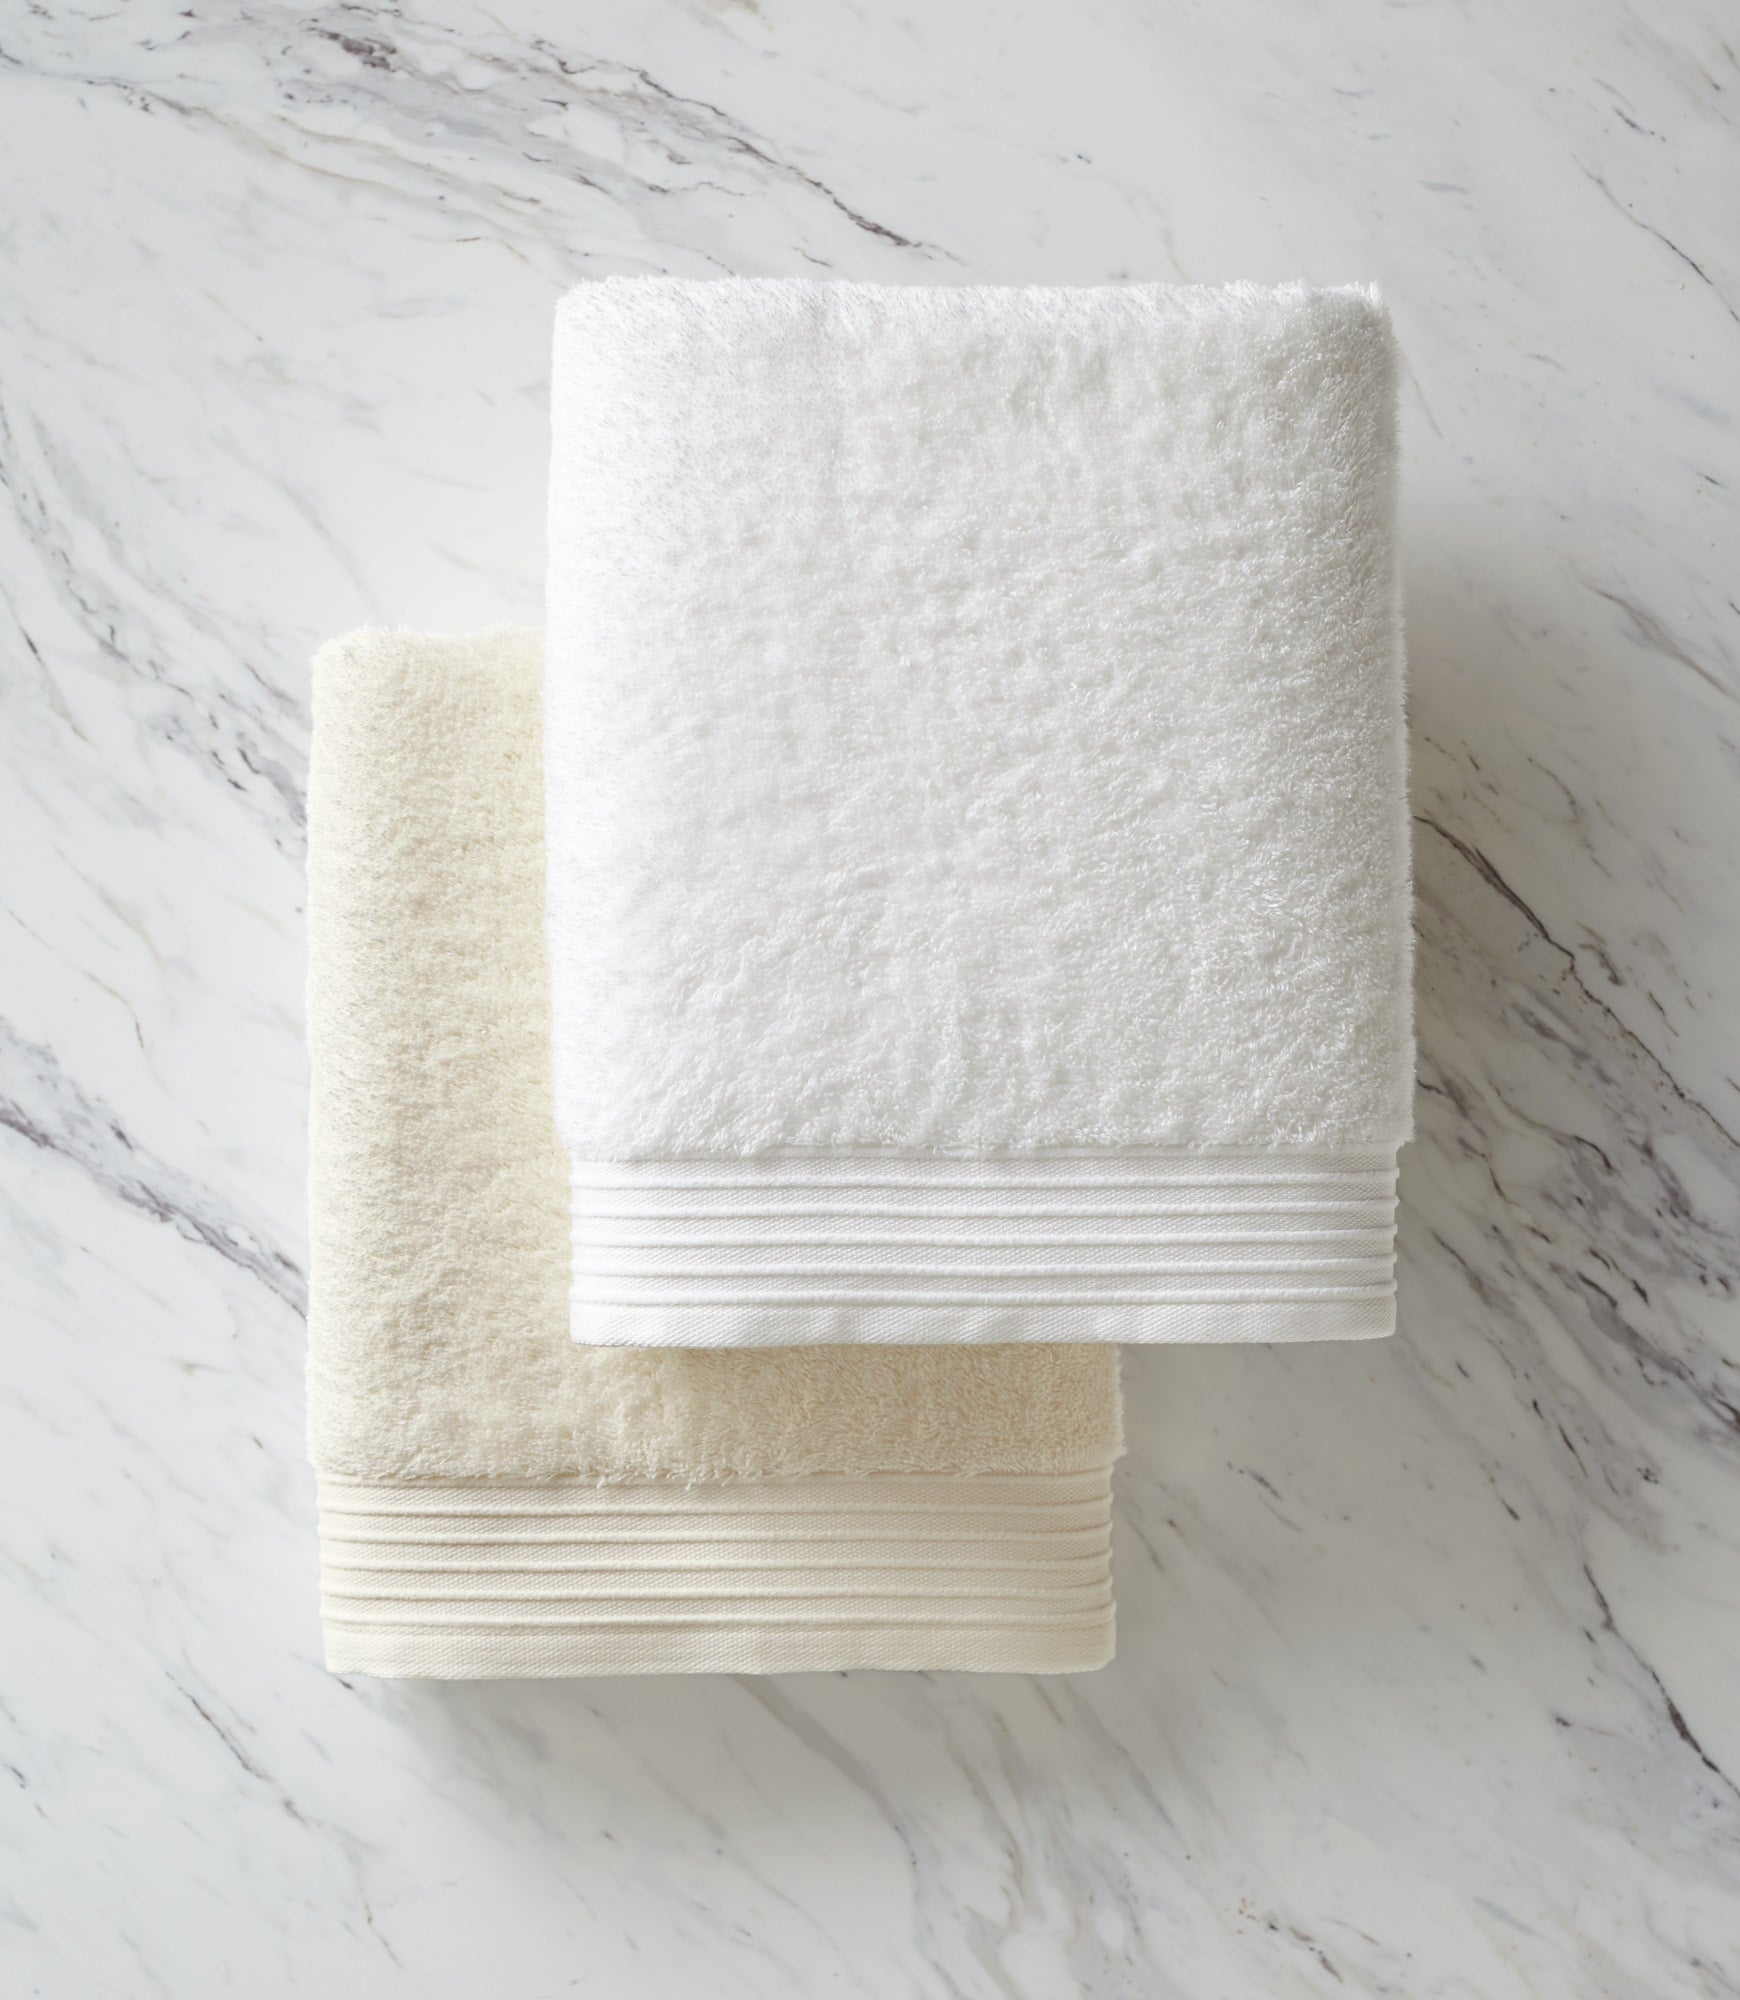  Fresh Towel Folded Disposable Hand Towels for Bathroom